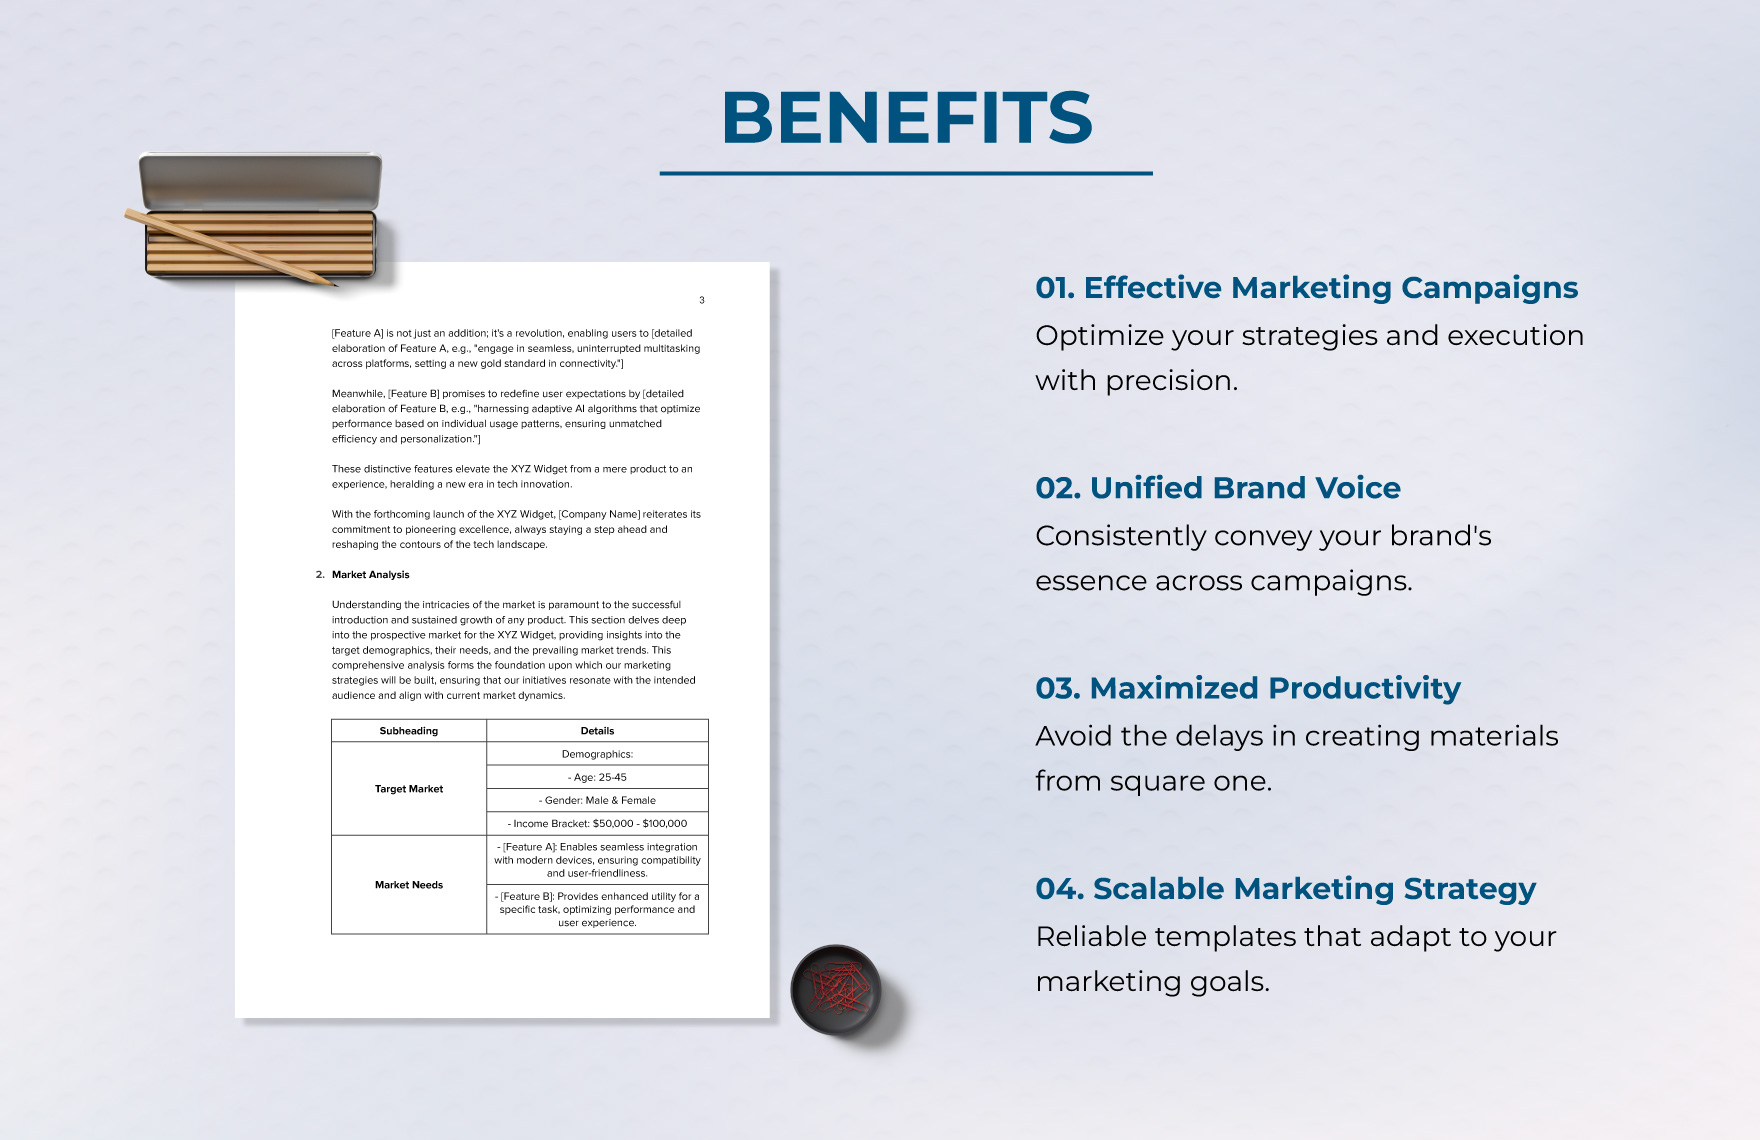 Marketing Extended Plan for Product Rollout Template